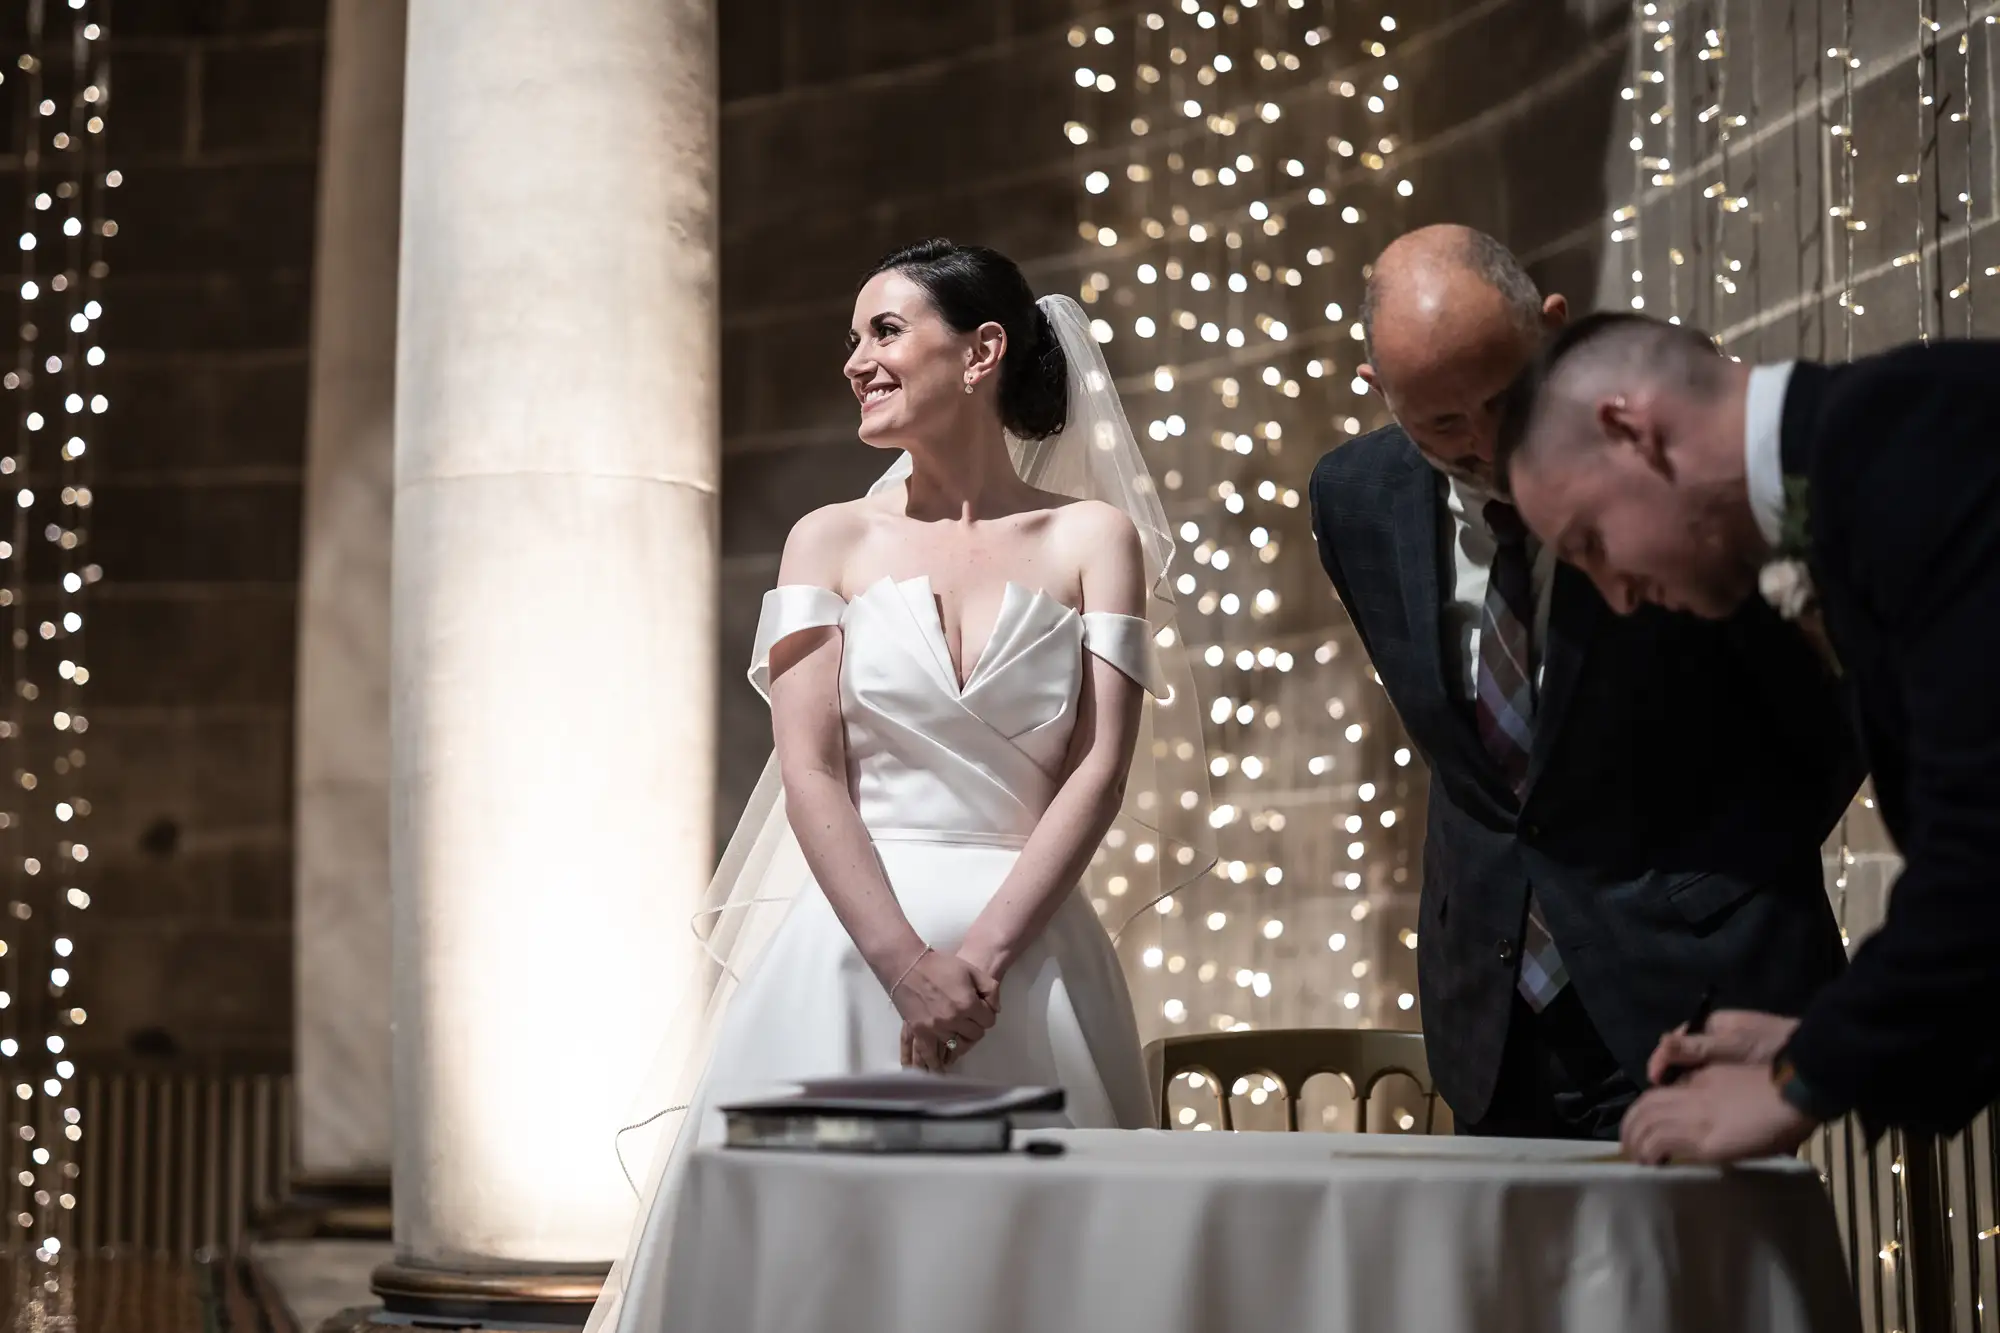 A bride in a white off-the-shoulder gown smiles during a ceremony, standing near two men signing a document, with a background of twinkling lights.